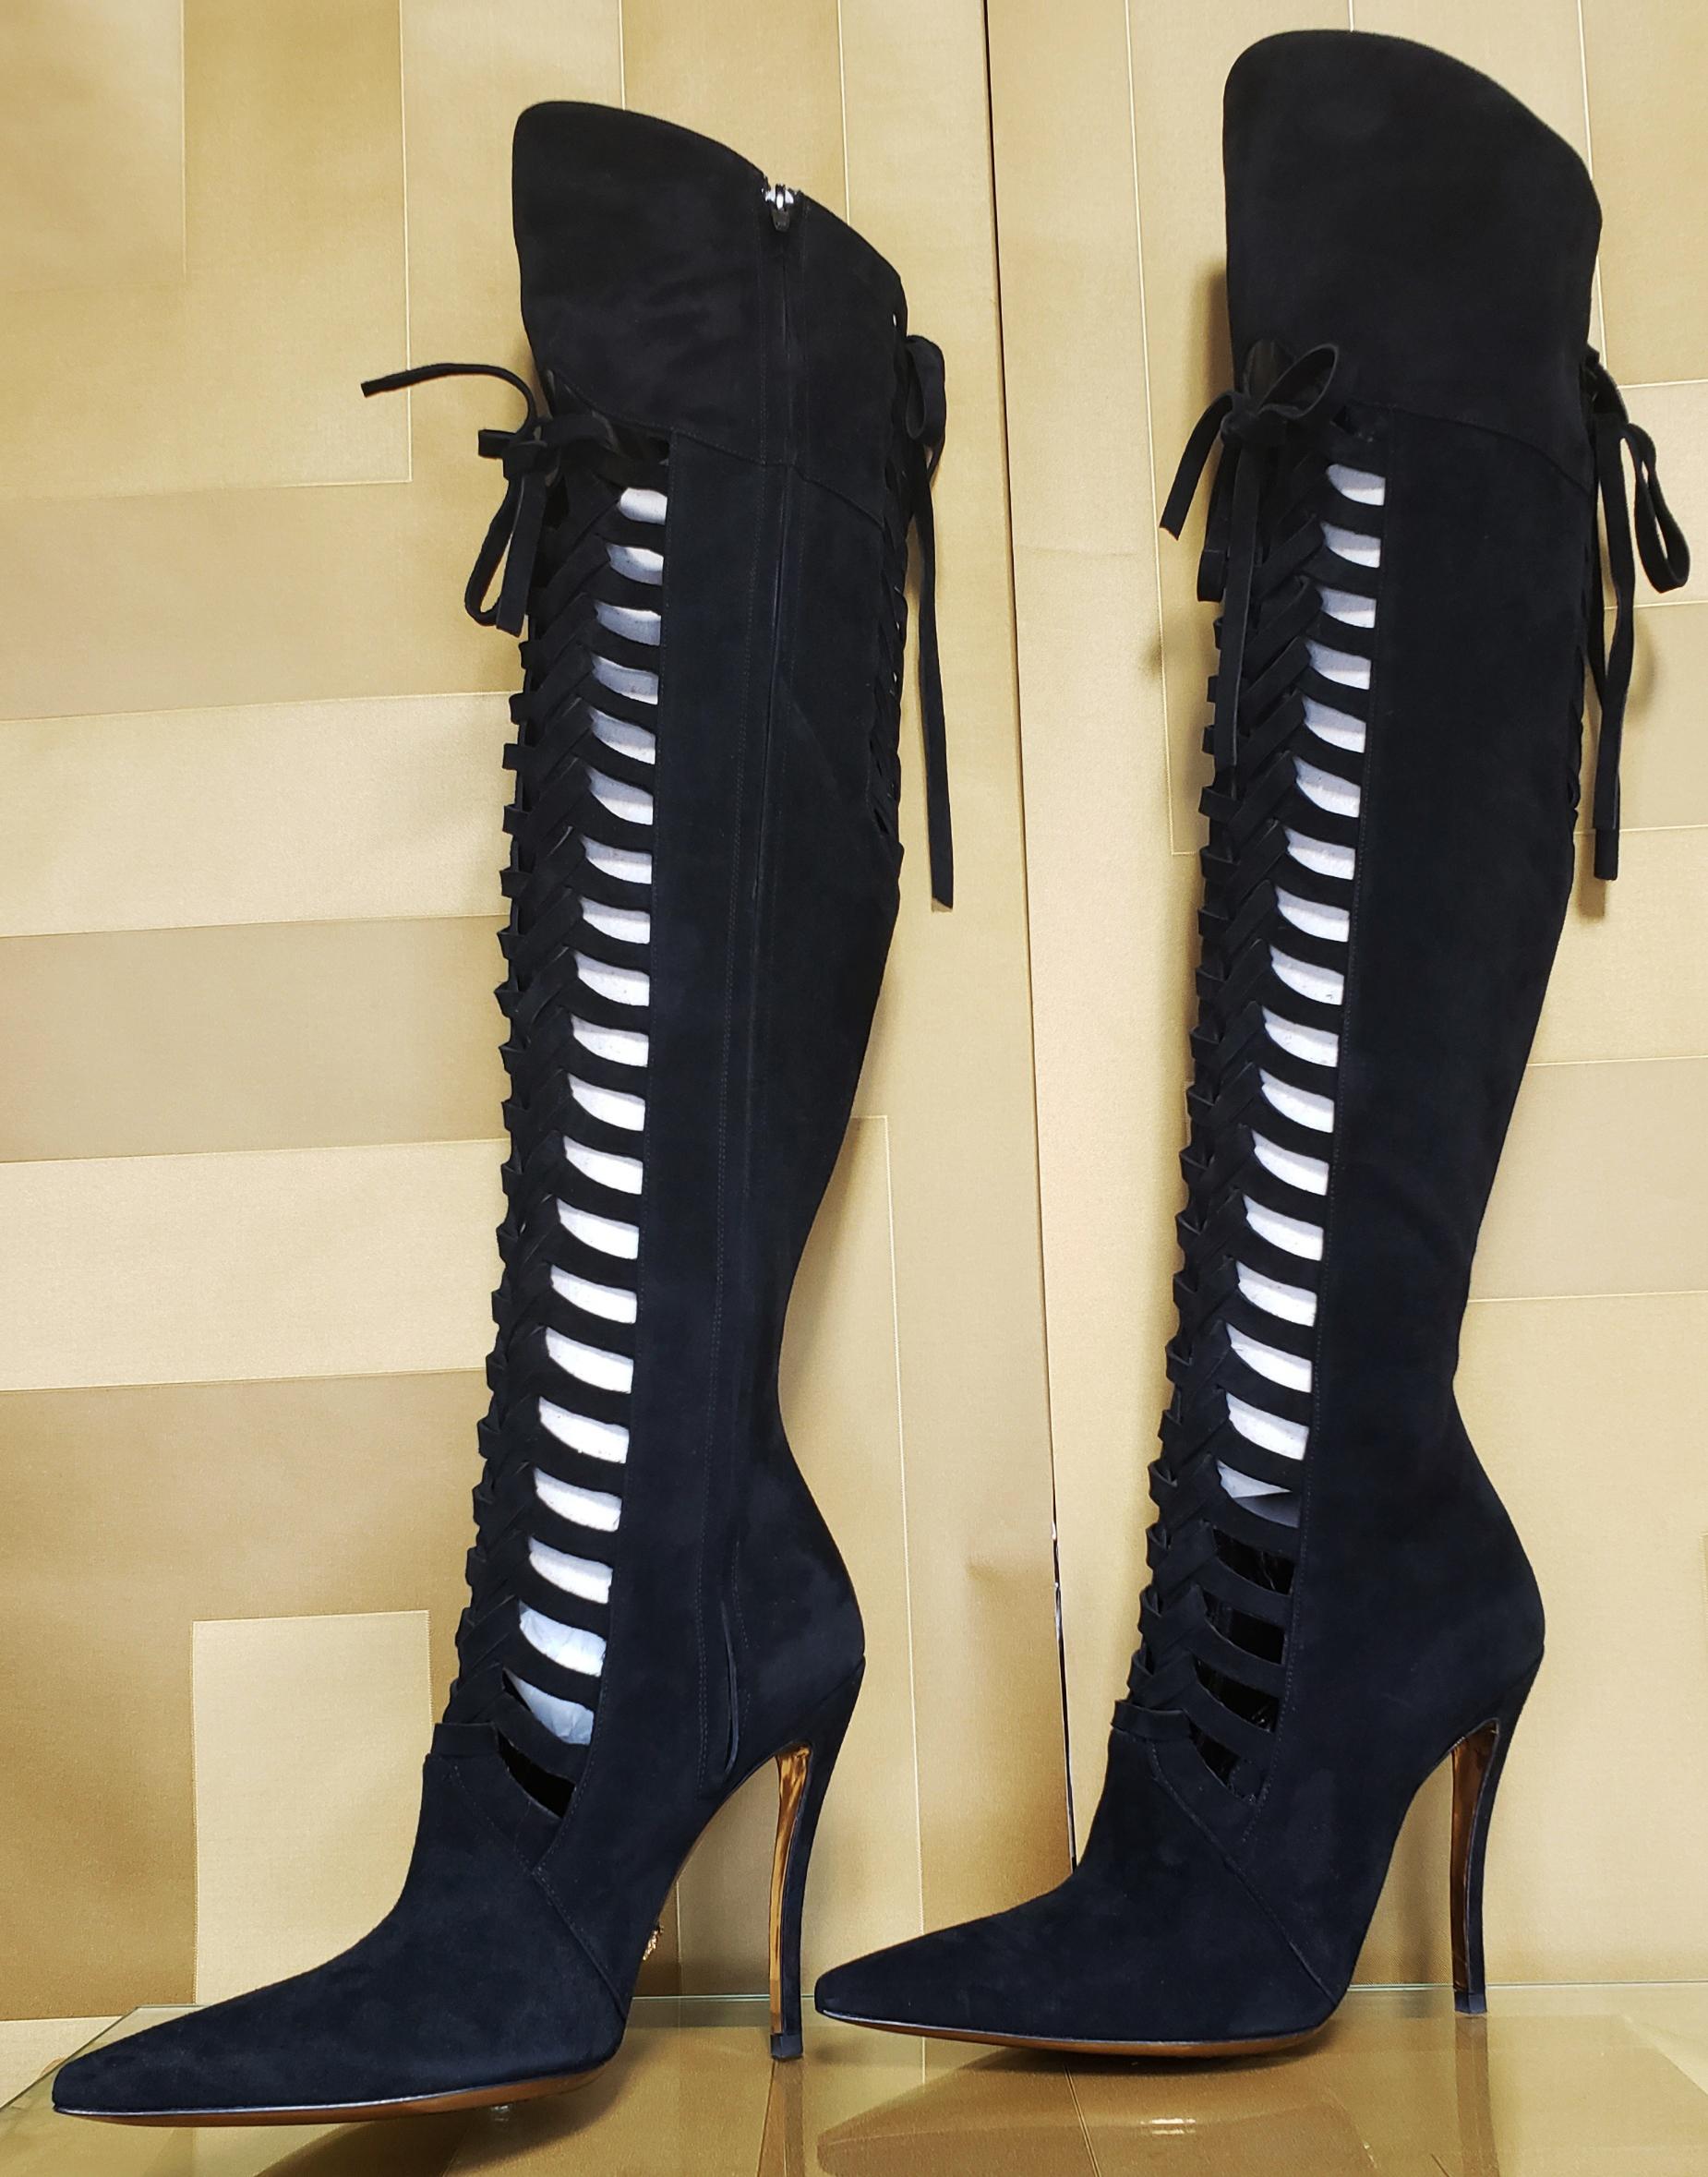 F/W 2014 Look # 27 NEW VERSACE BLACK SUEDE OVER THE KNEE BOOTS 38 - 8 For Sale 8